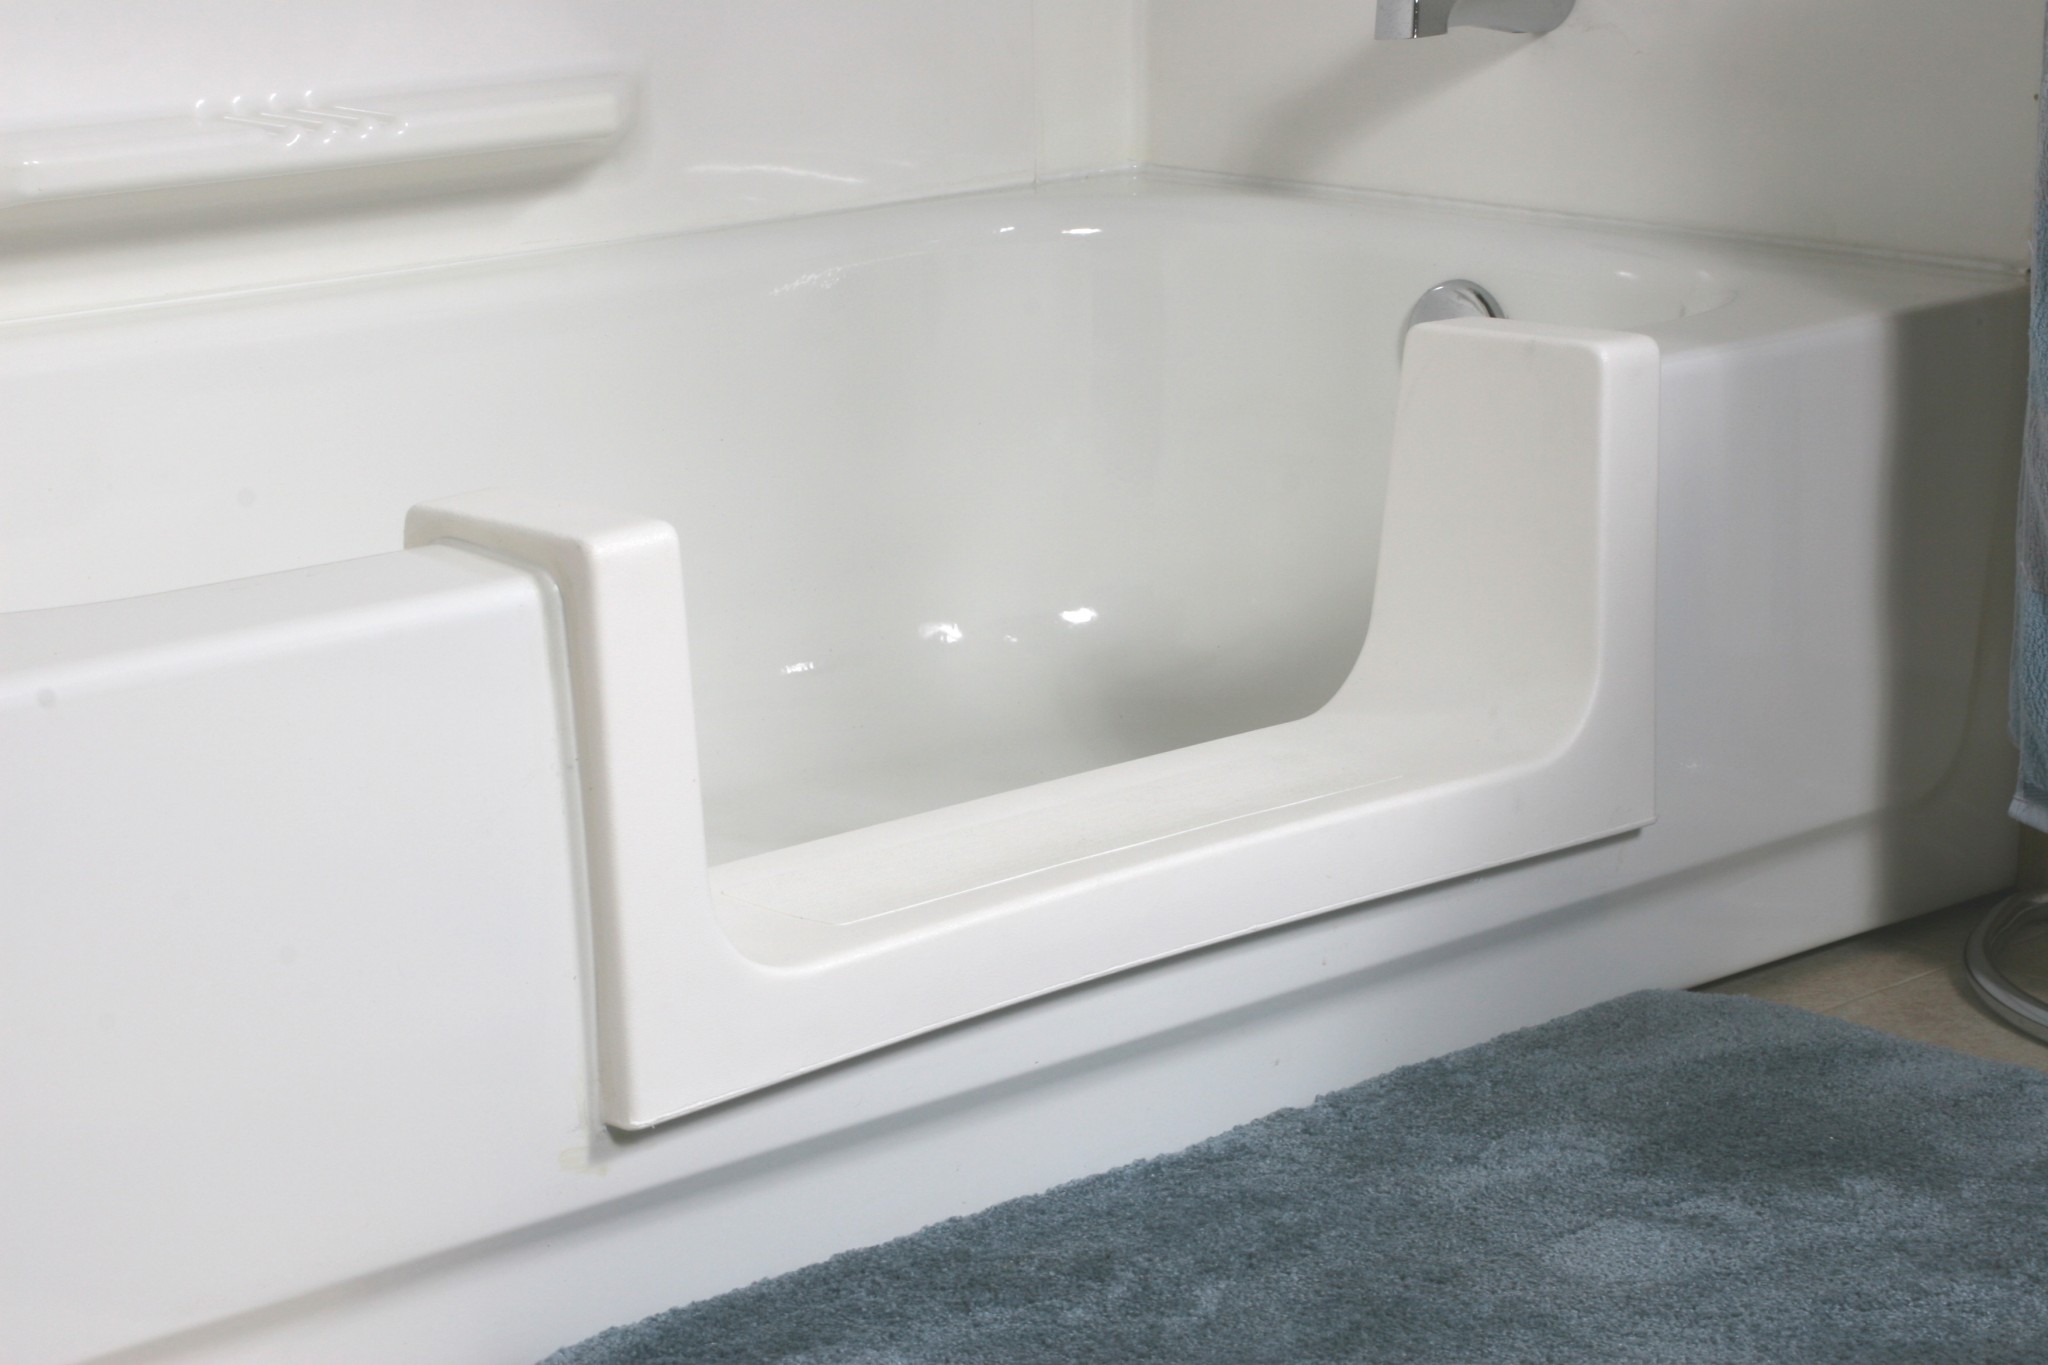 tub cut-out solution for safe bathing